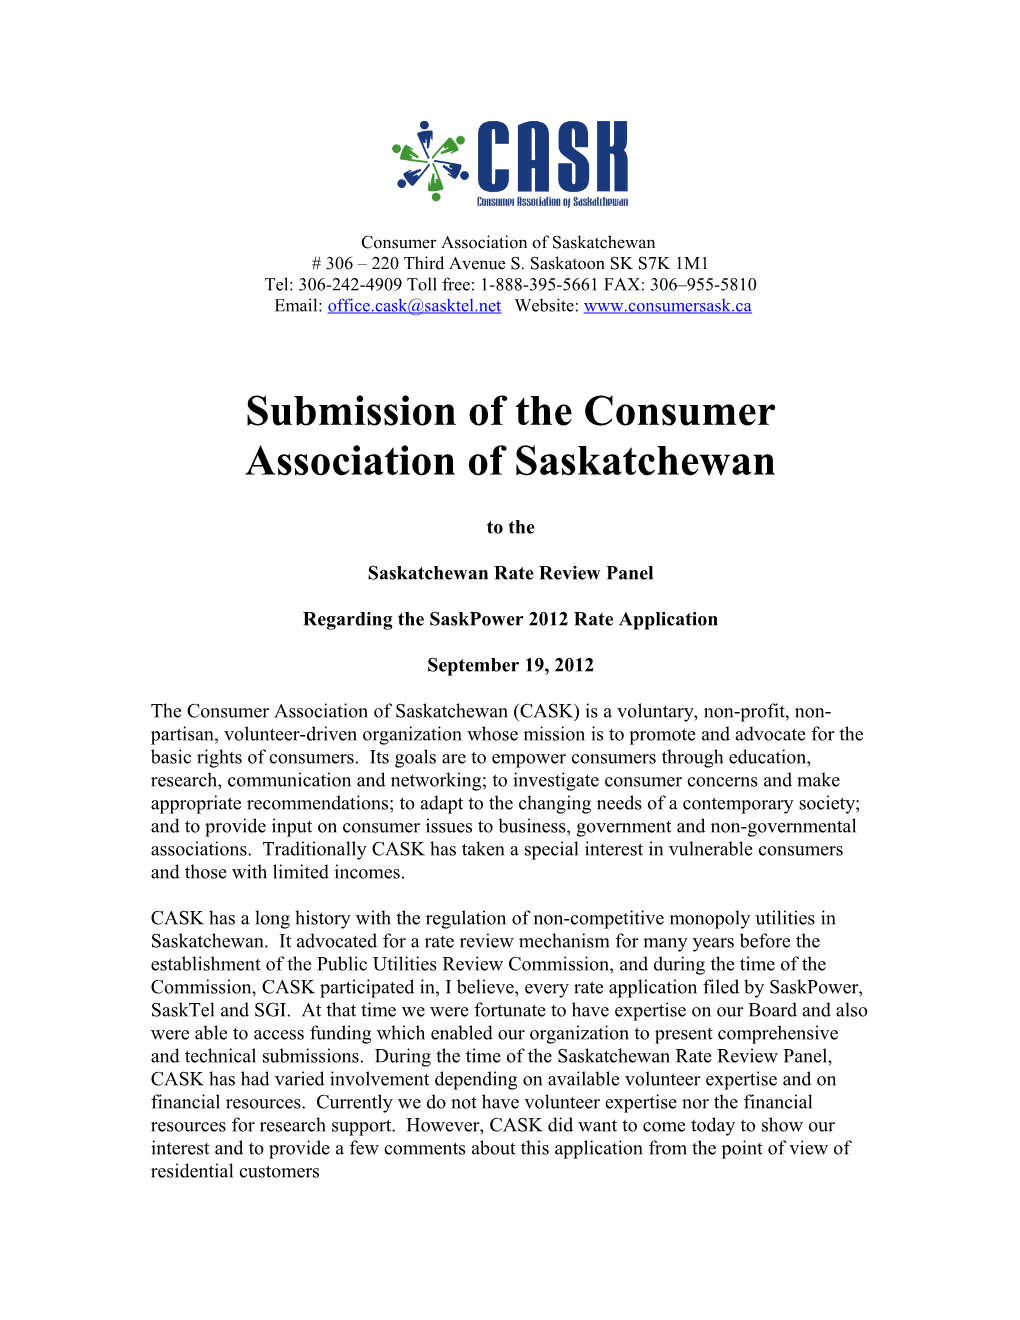 Submission of the Consumers Association of Canada, Saskatchewan Branch